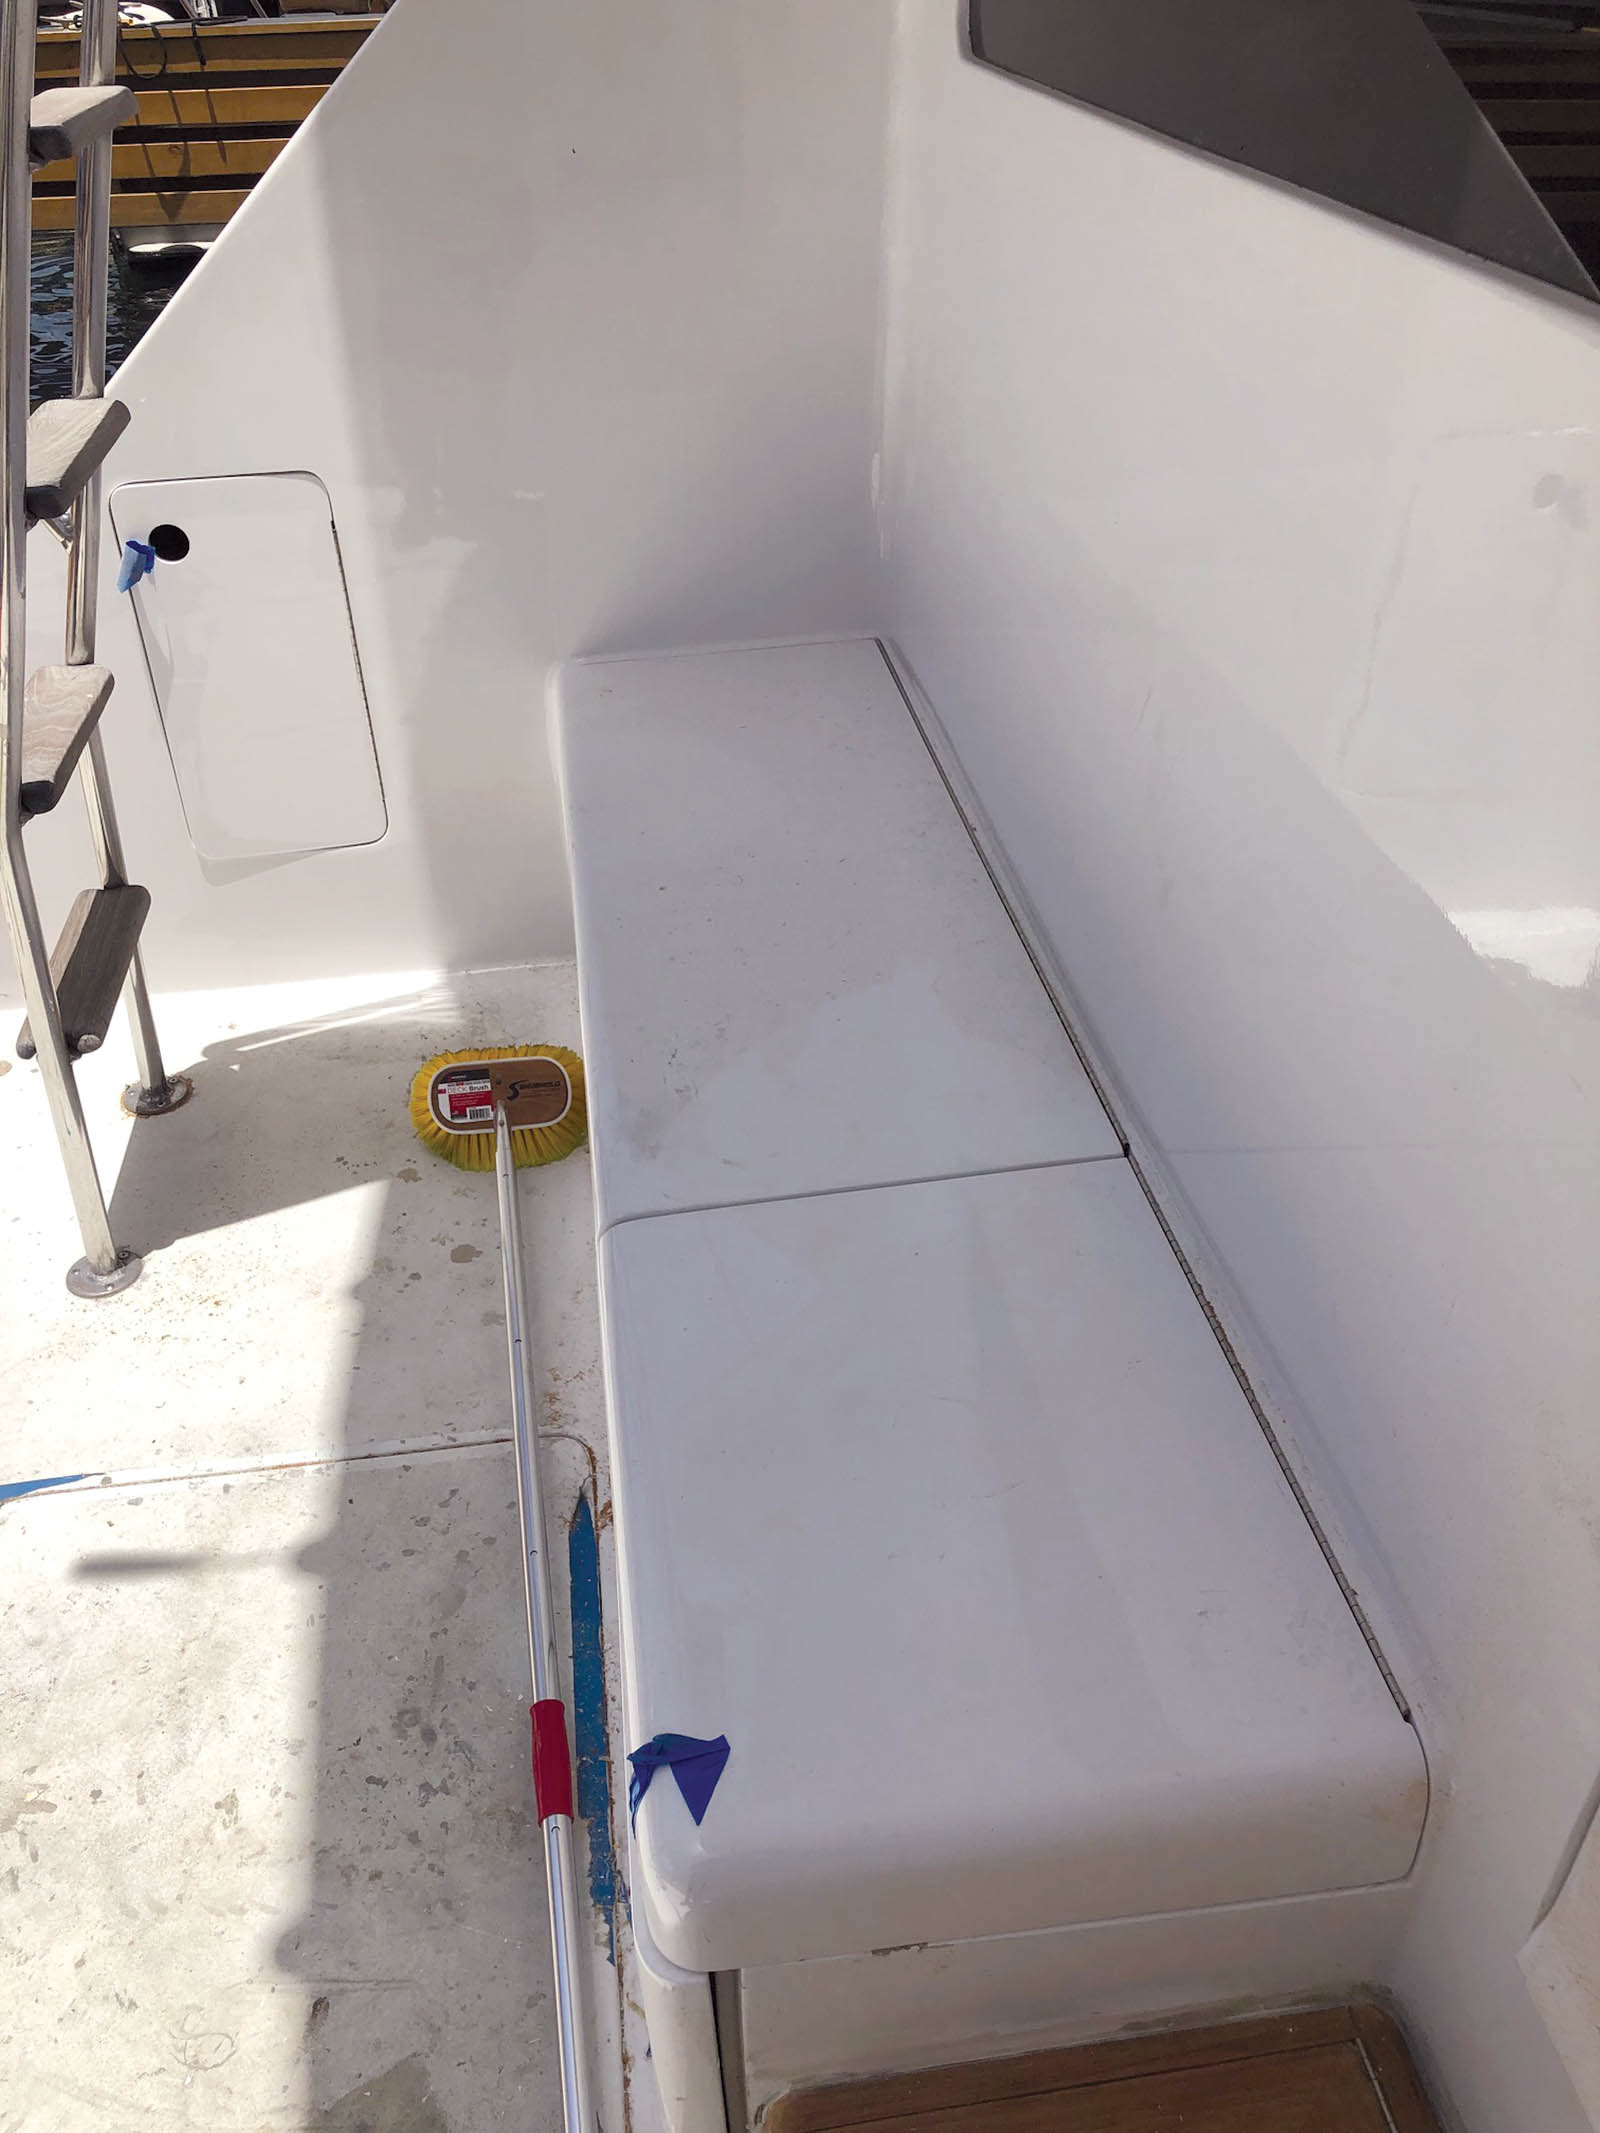 The Almighty Boat Cushion: A guide to boat cushion fabrication